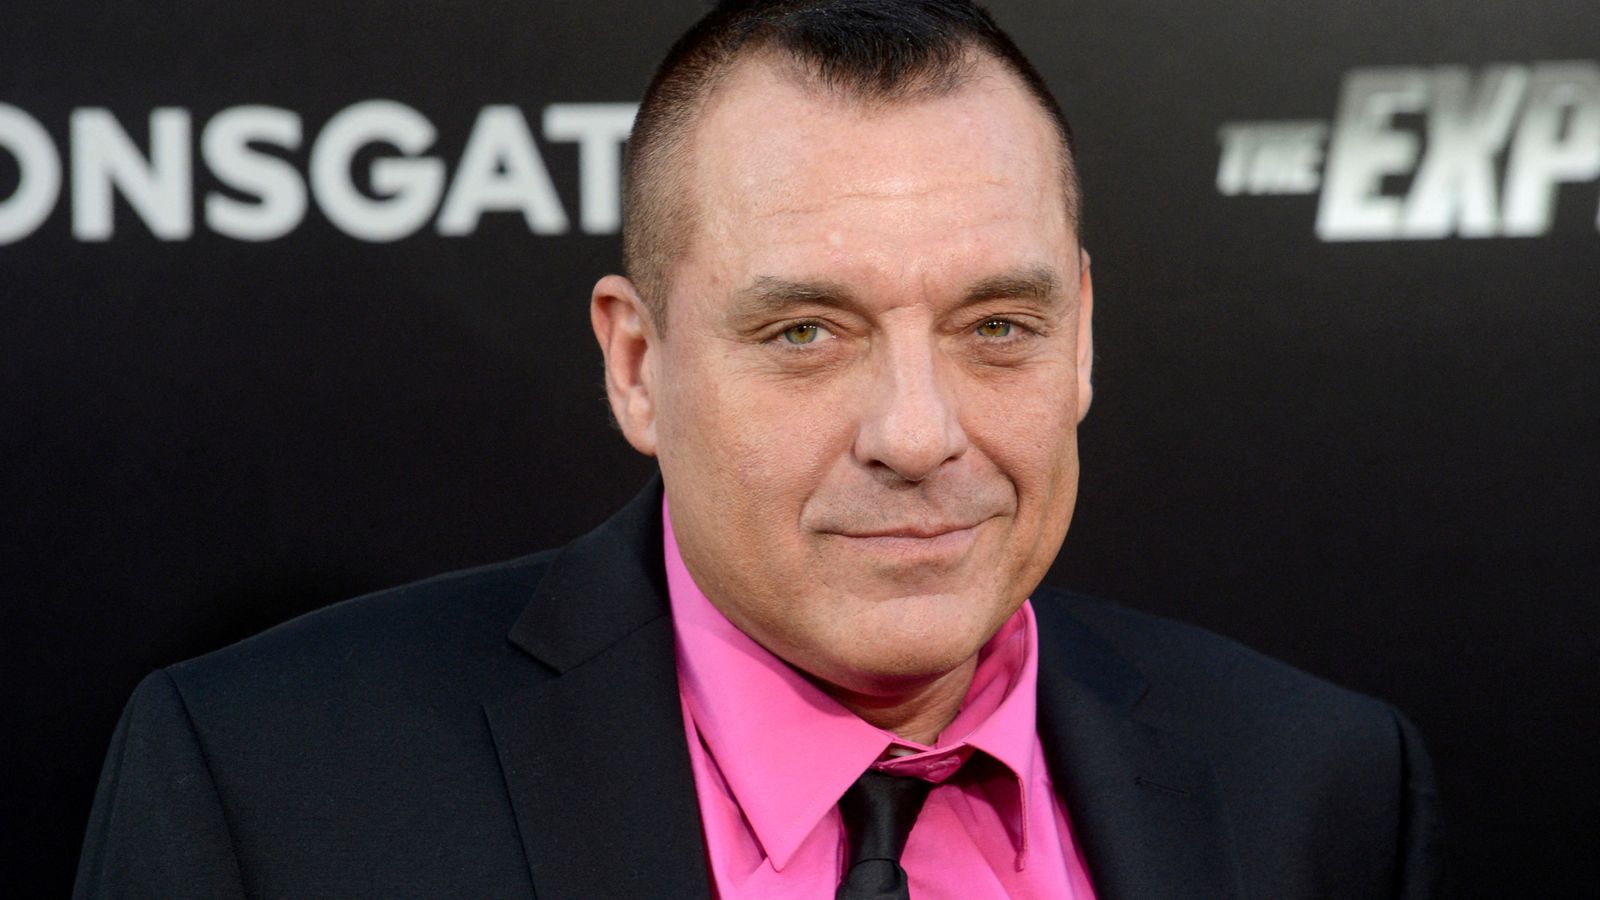 What is a brain aneurysm? The vessel rupture that left actor Tom Sizemore in a critical condition